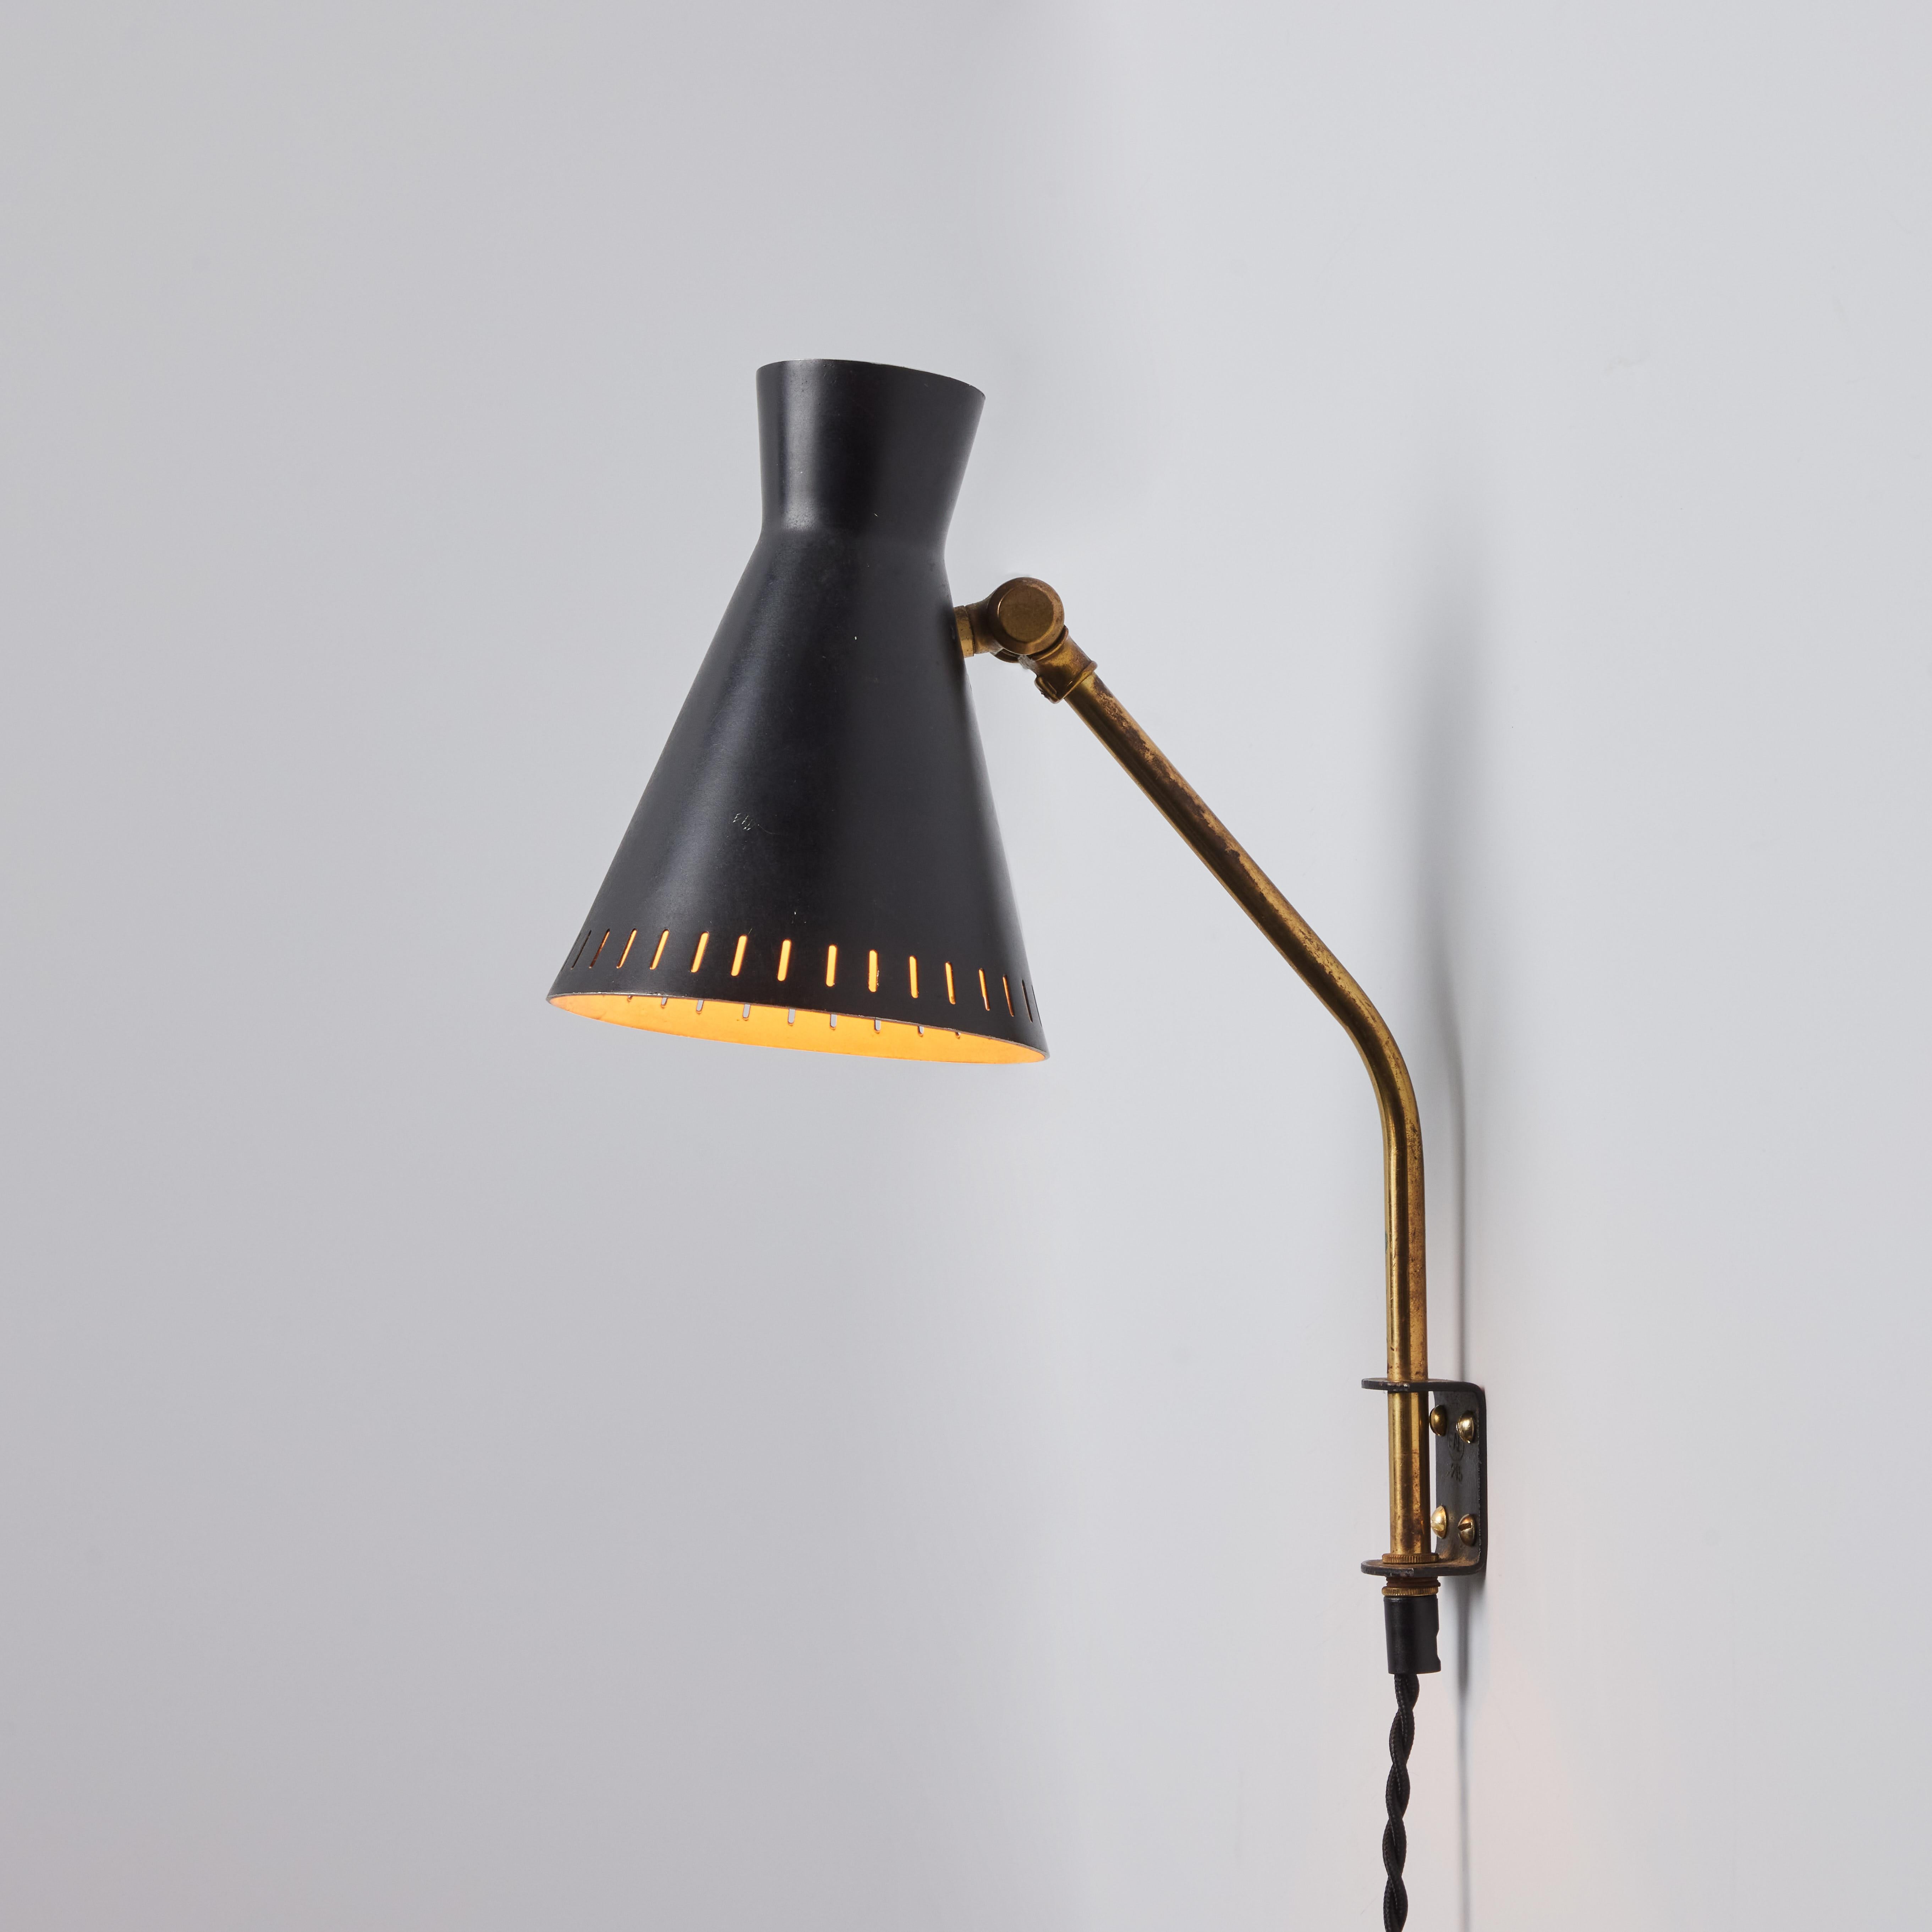 1950s Perforated Metal Diabolo Plug-In Wall Lamp Attributed to Mauri Almari For Sale 1